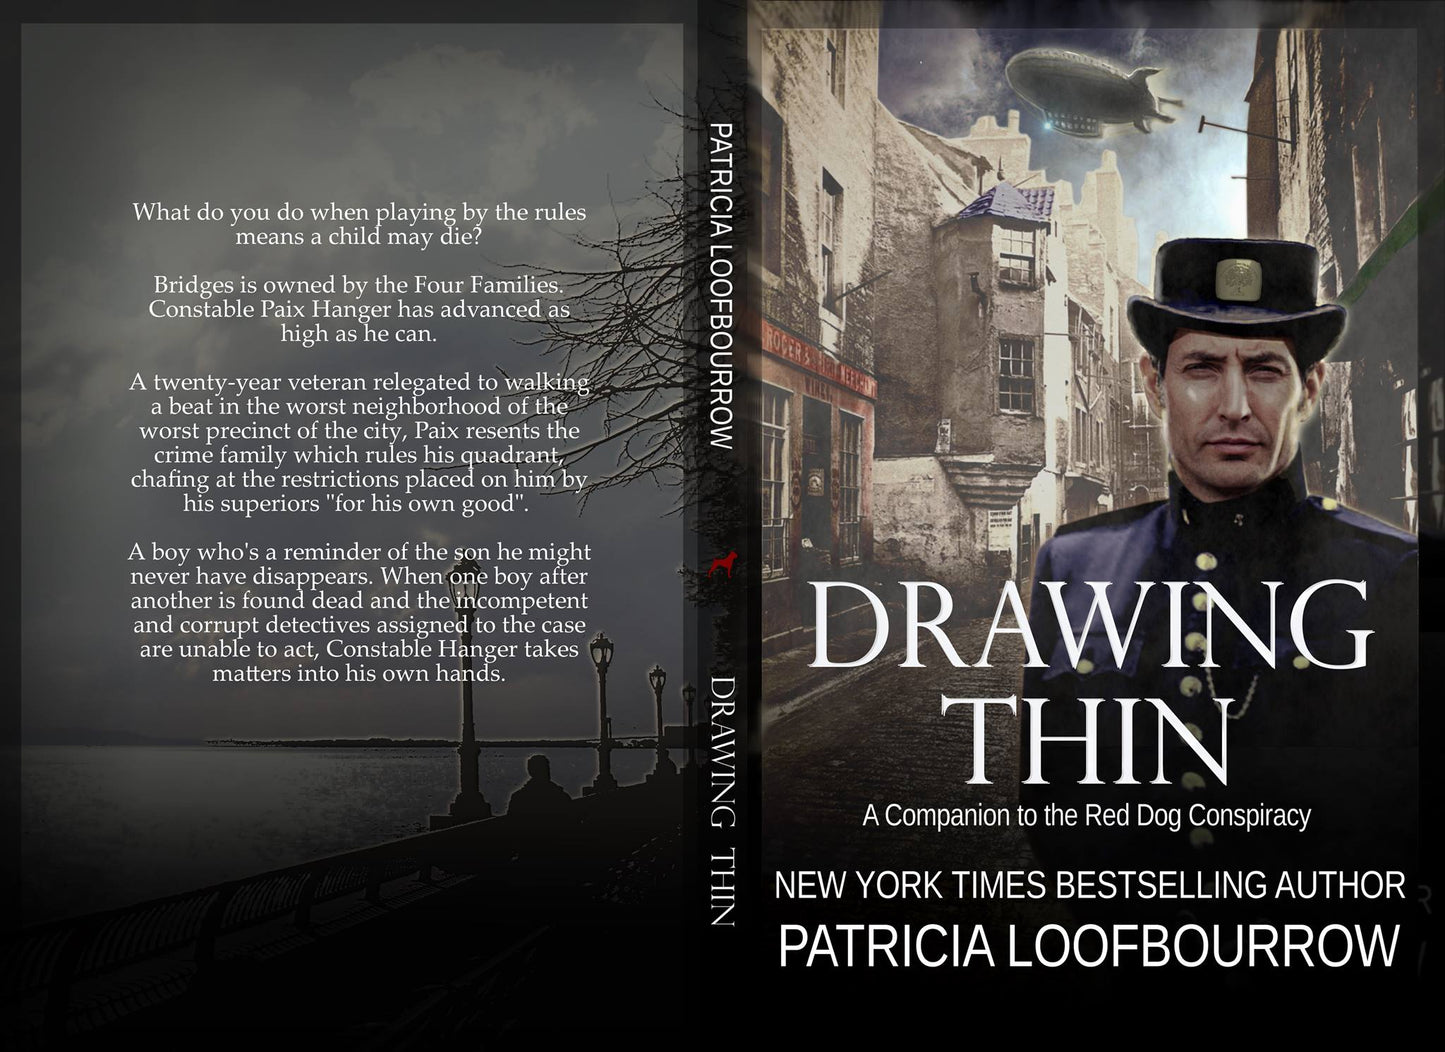 Drawing Thin [signed paperback] - PatriciaLoofbourrow